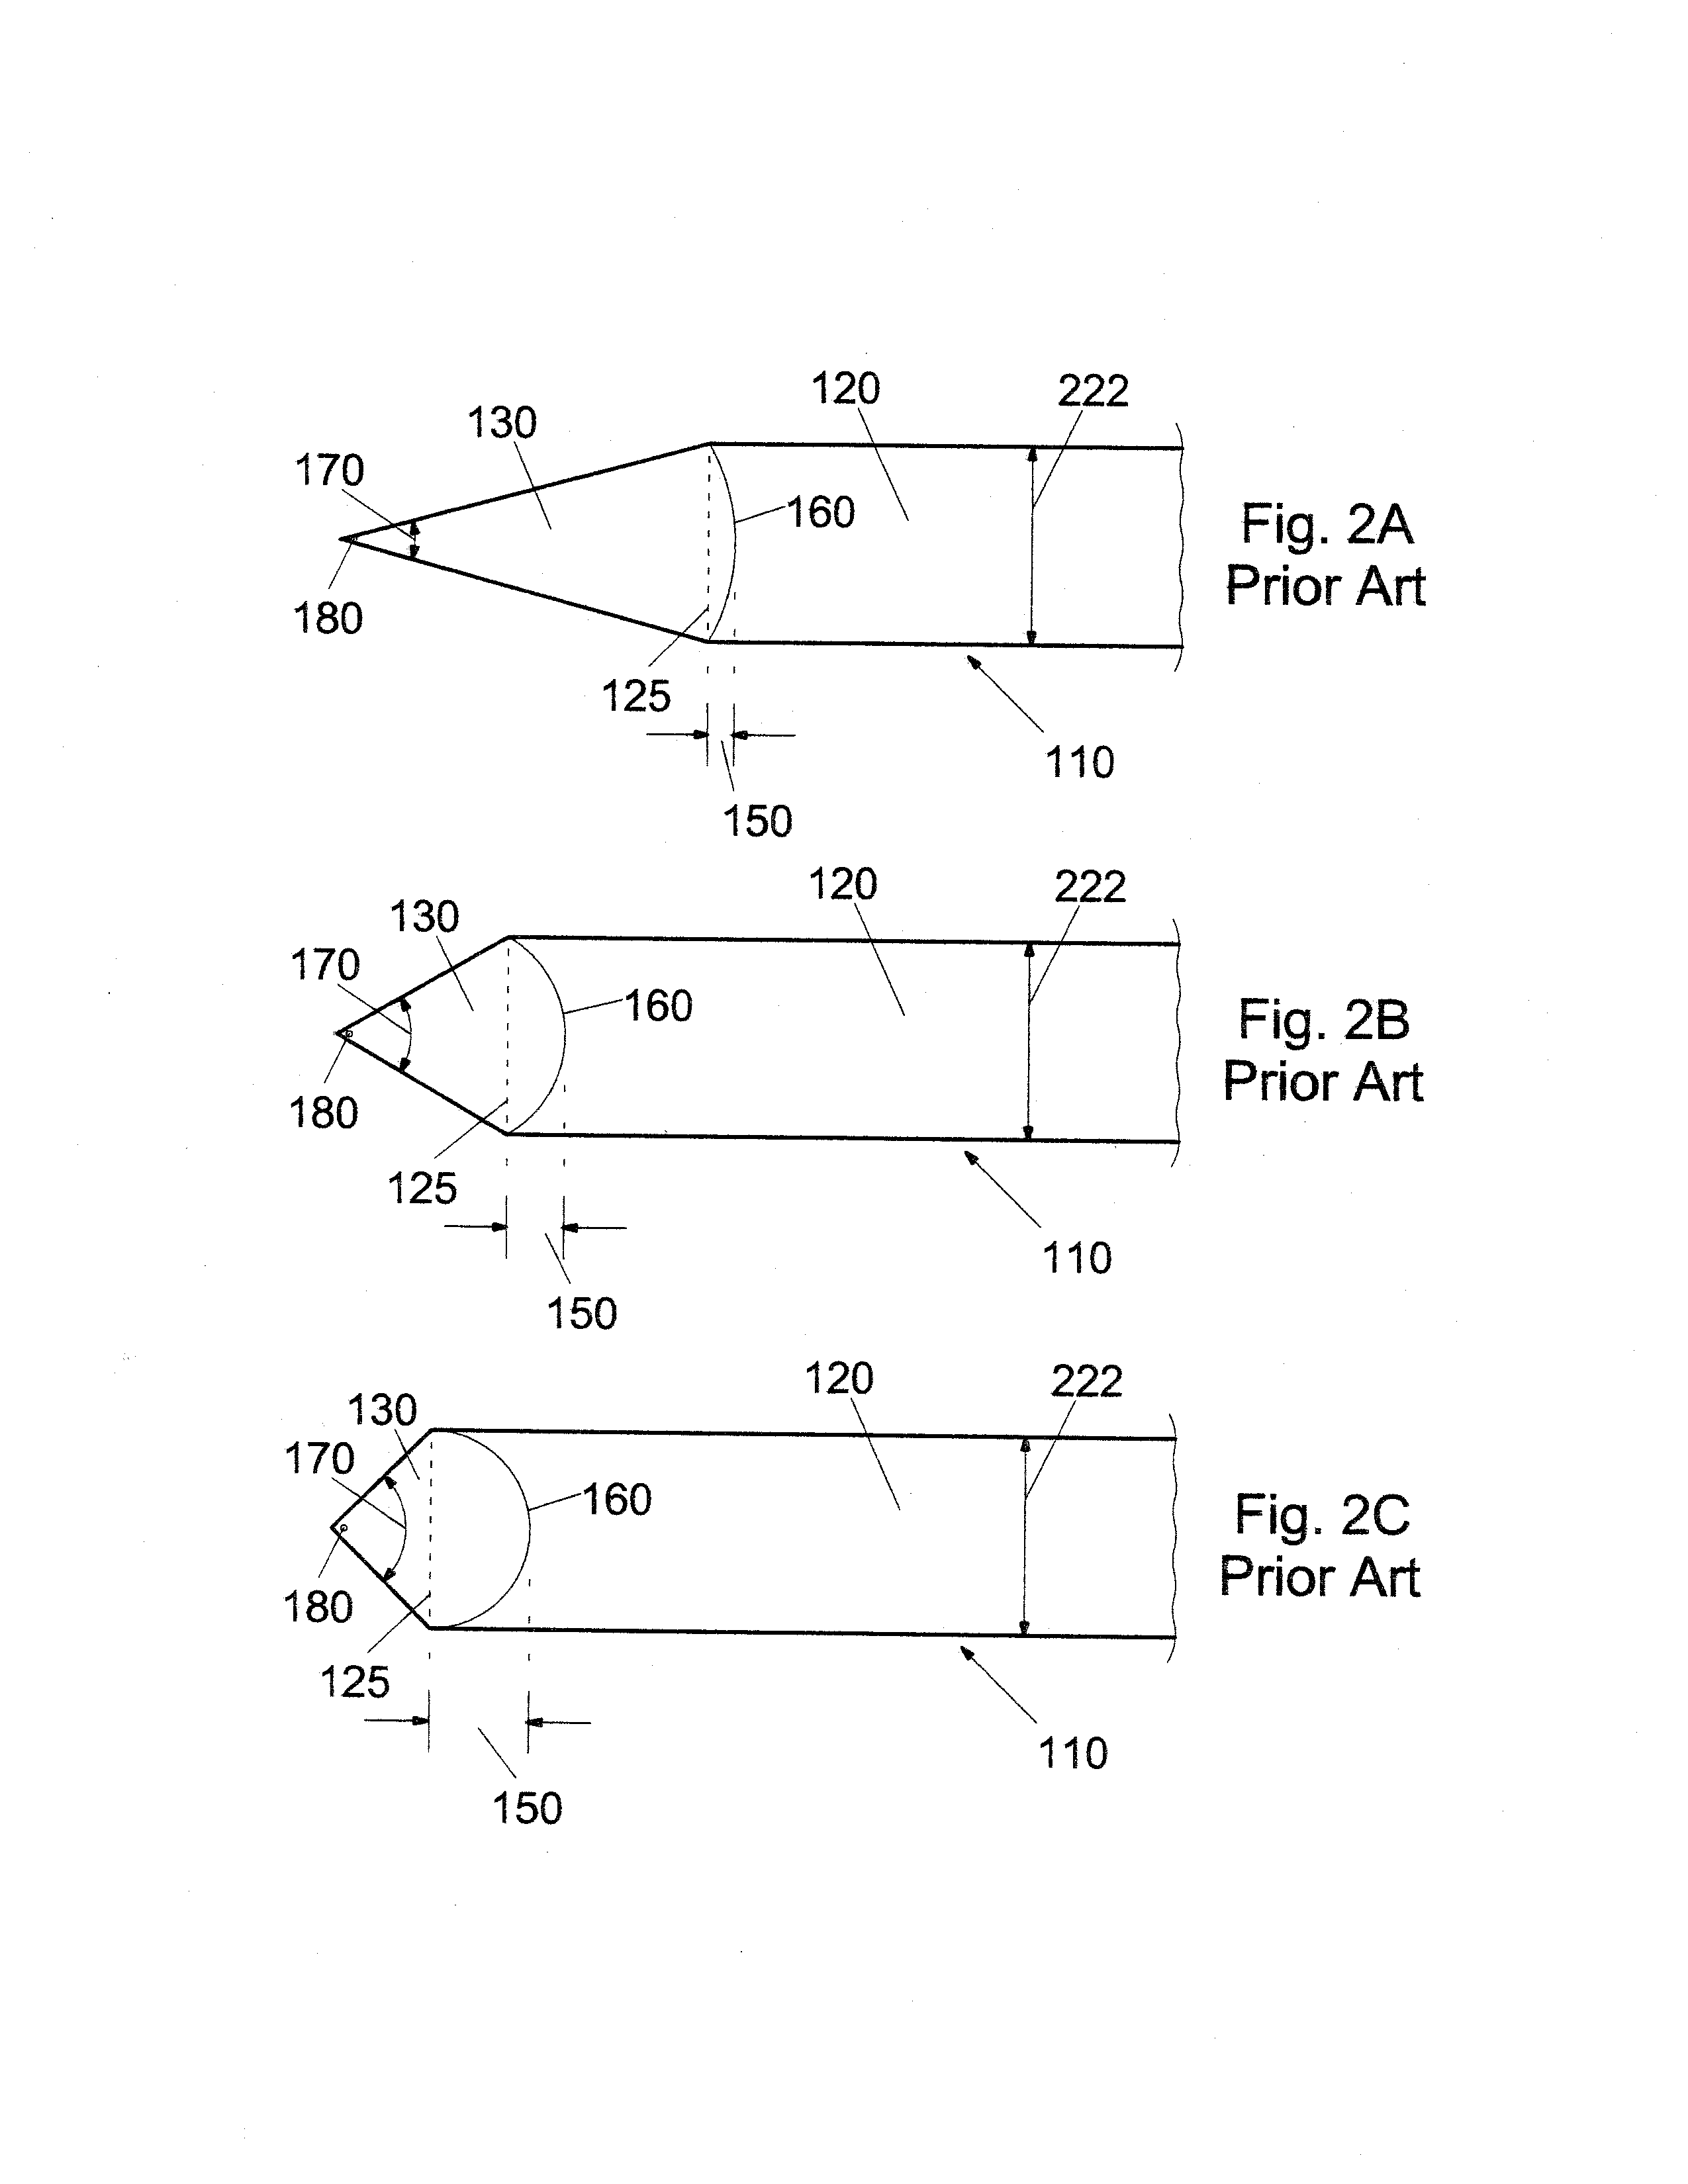 Apparatus and methods for transferring materials between locations possessing different cross-sectional areas with minimal band spreading and dispersion due to unequal path-lengths